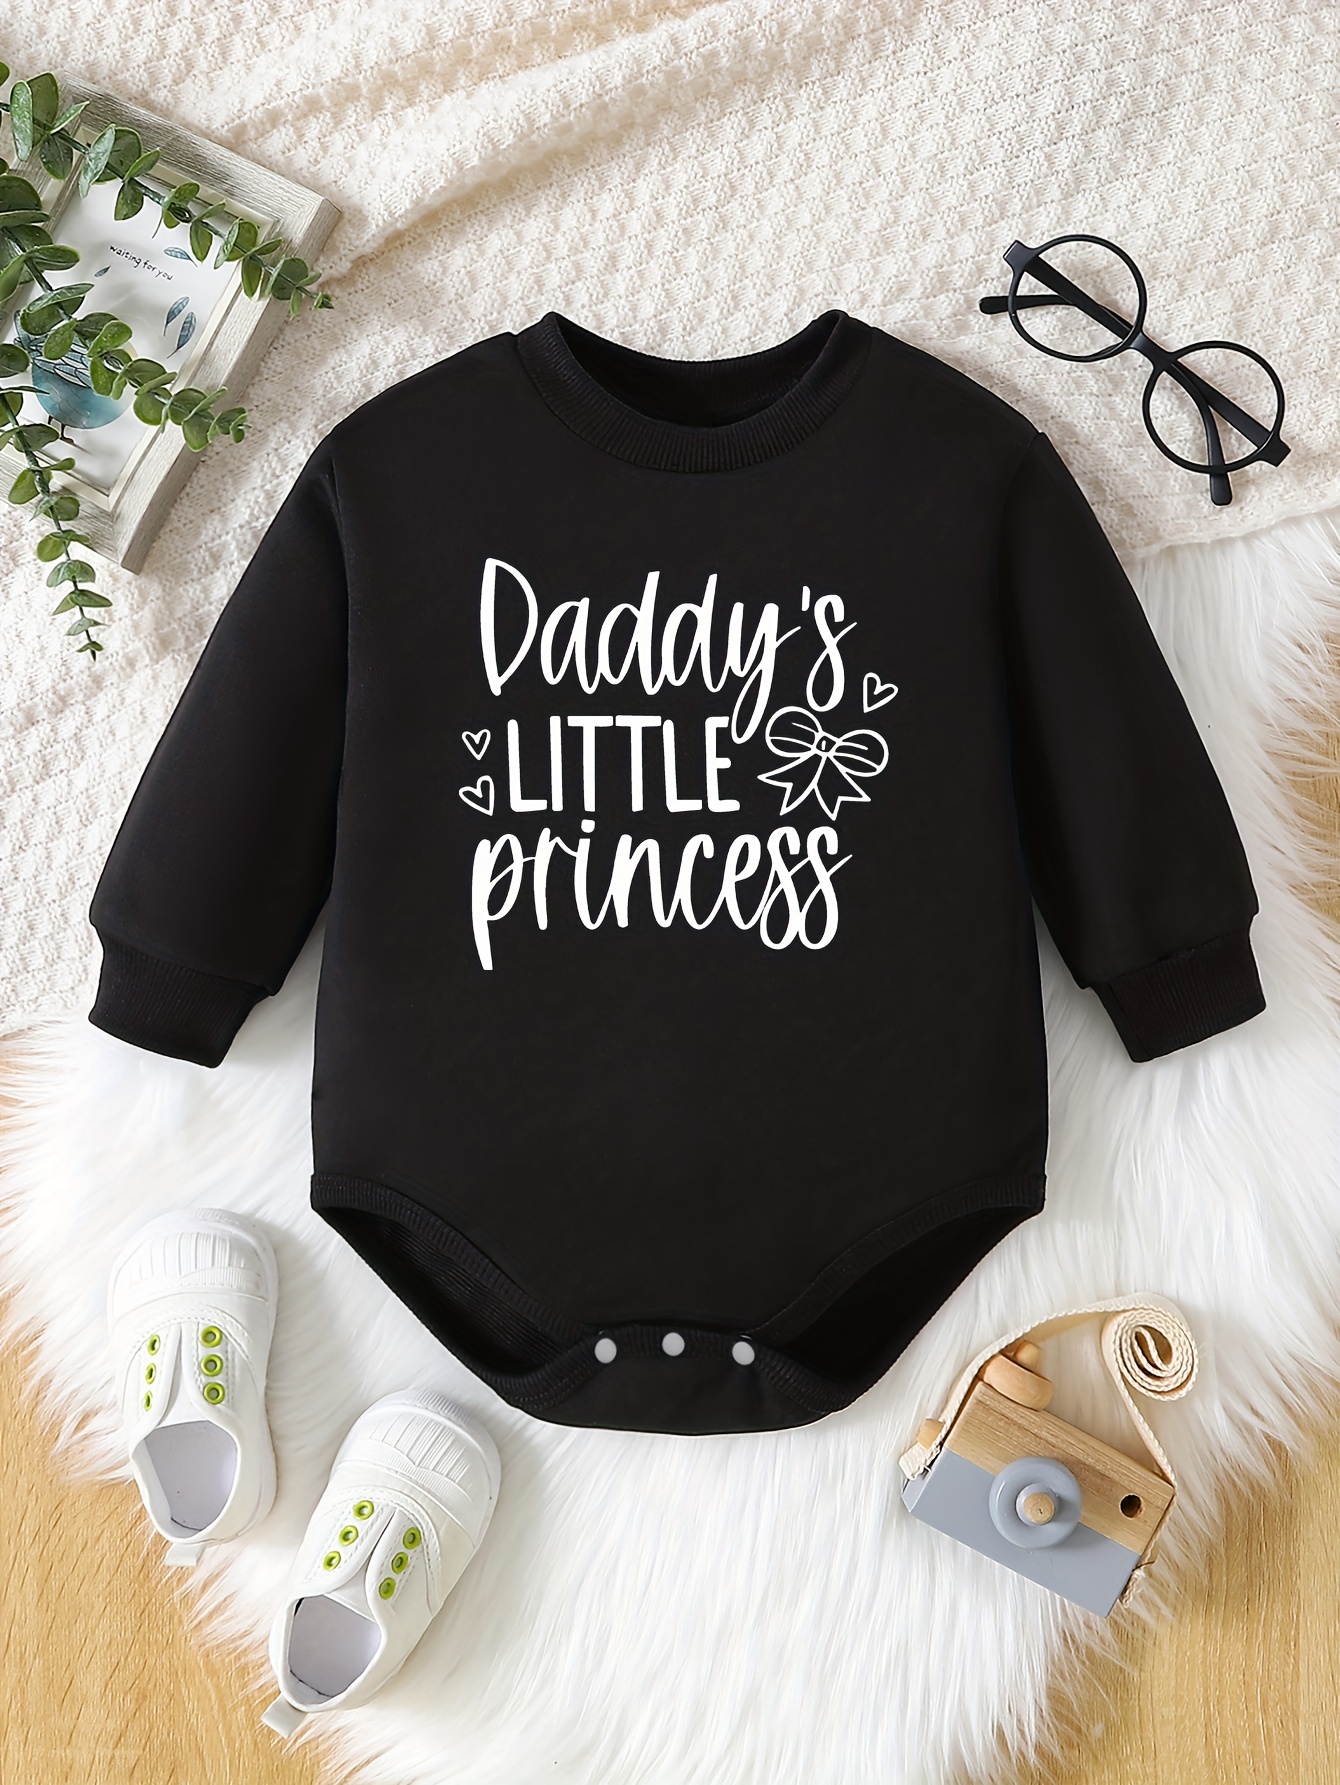 Newborn Princess Baby Clothing and Accessories for Infant Girl